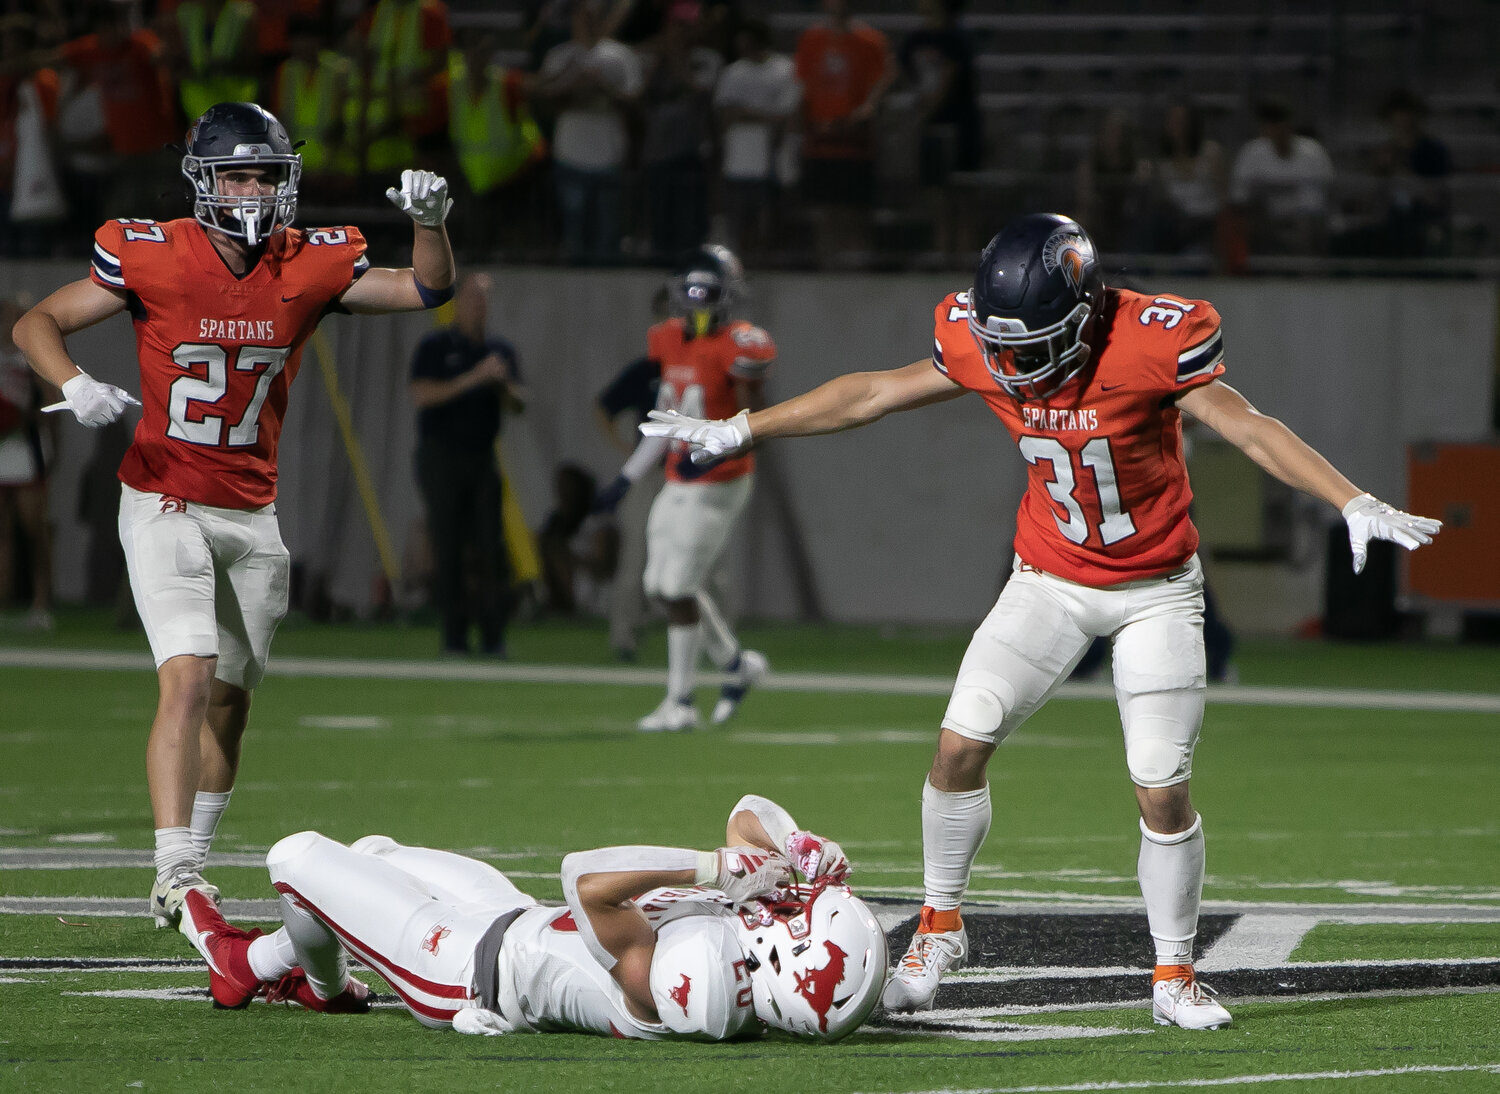 Carter LeCompte and John Paul Johnson celebrate after a pass breakup during Thursday's game between Seven Lakes and Memorial at Legacy Stadium.